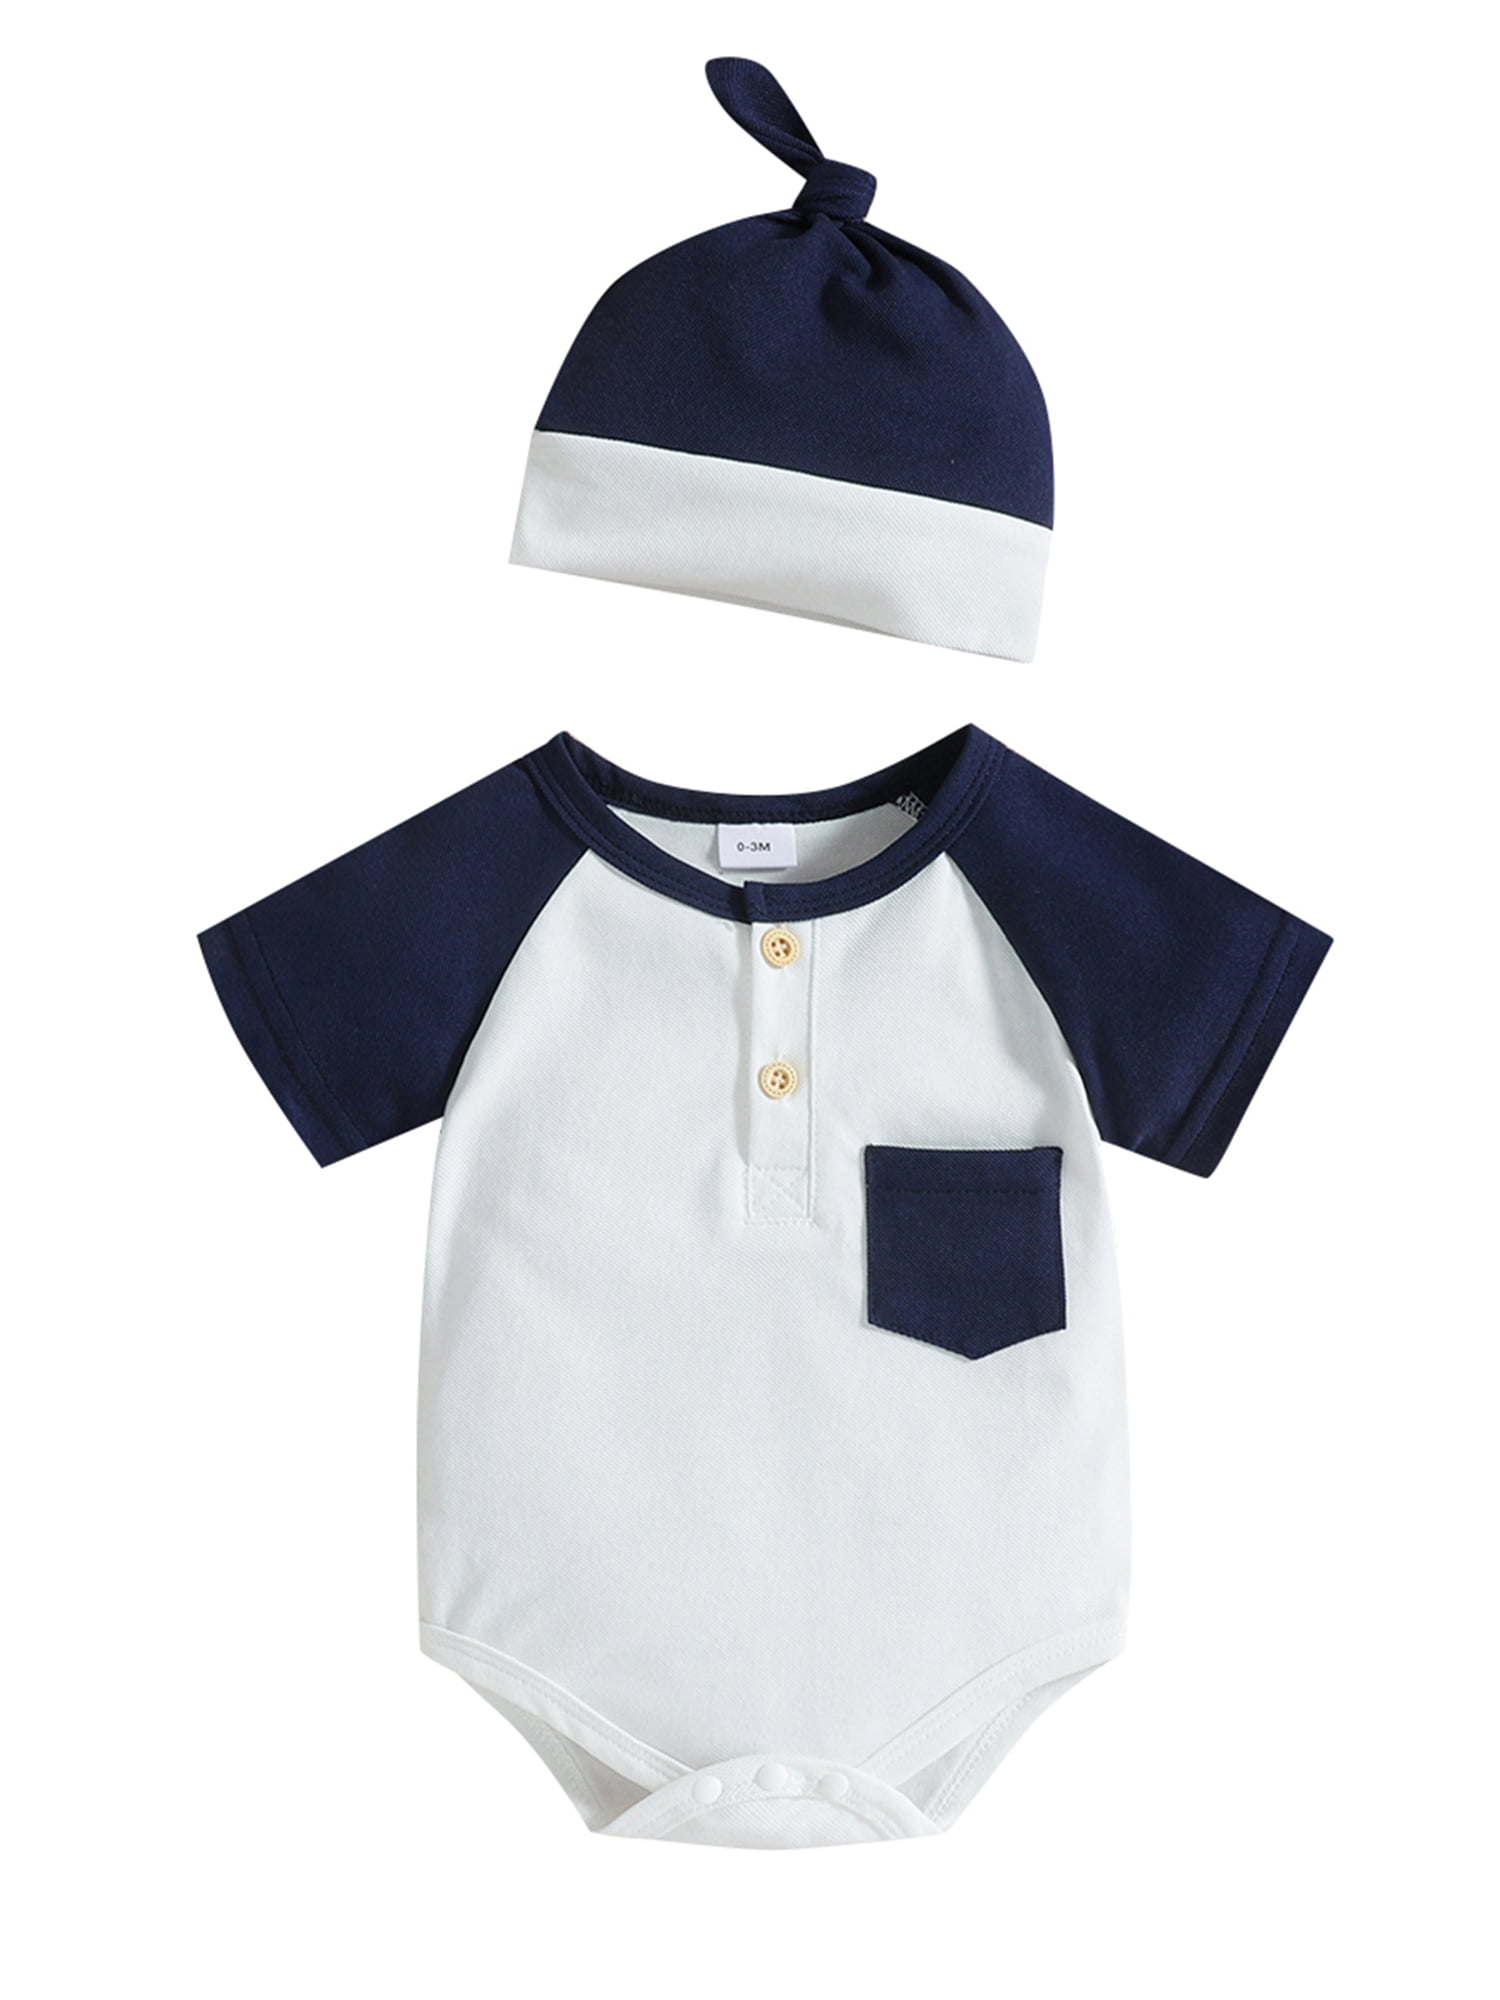 Mialoley Unisex Baby Boys Romper hi Strips Pants+Hat Outfit Summer Clothes Set Im New HERE Tops Bodysuit